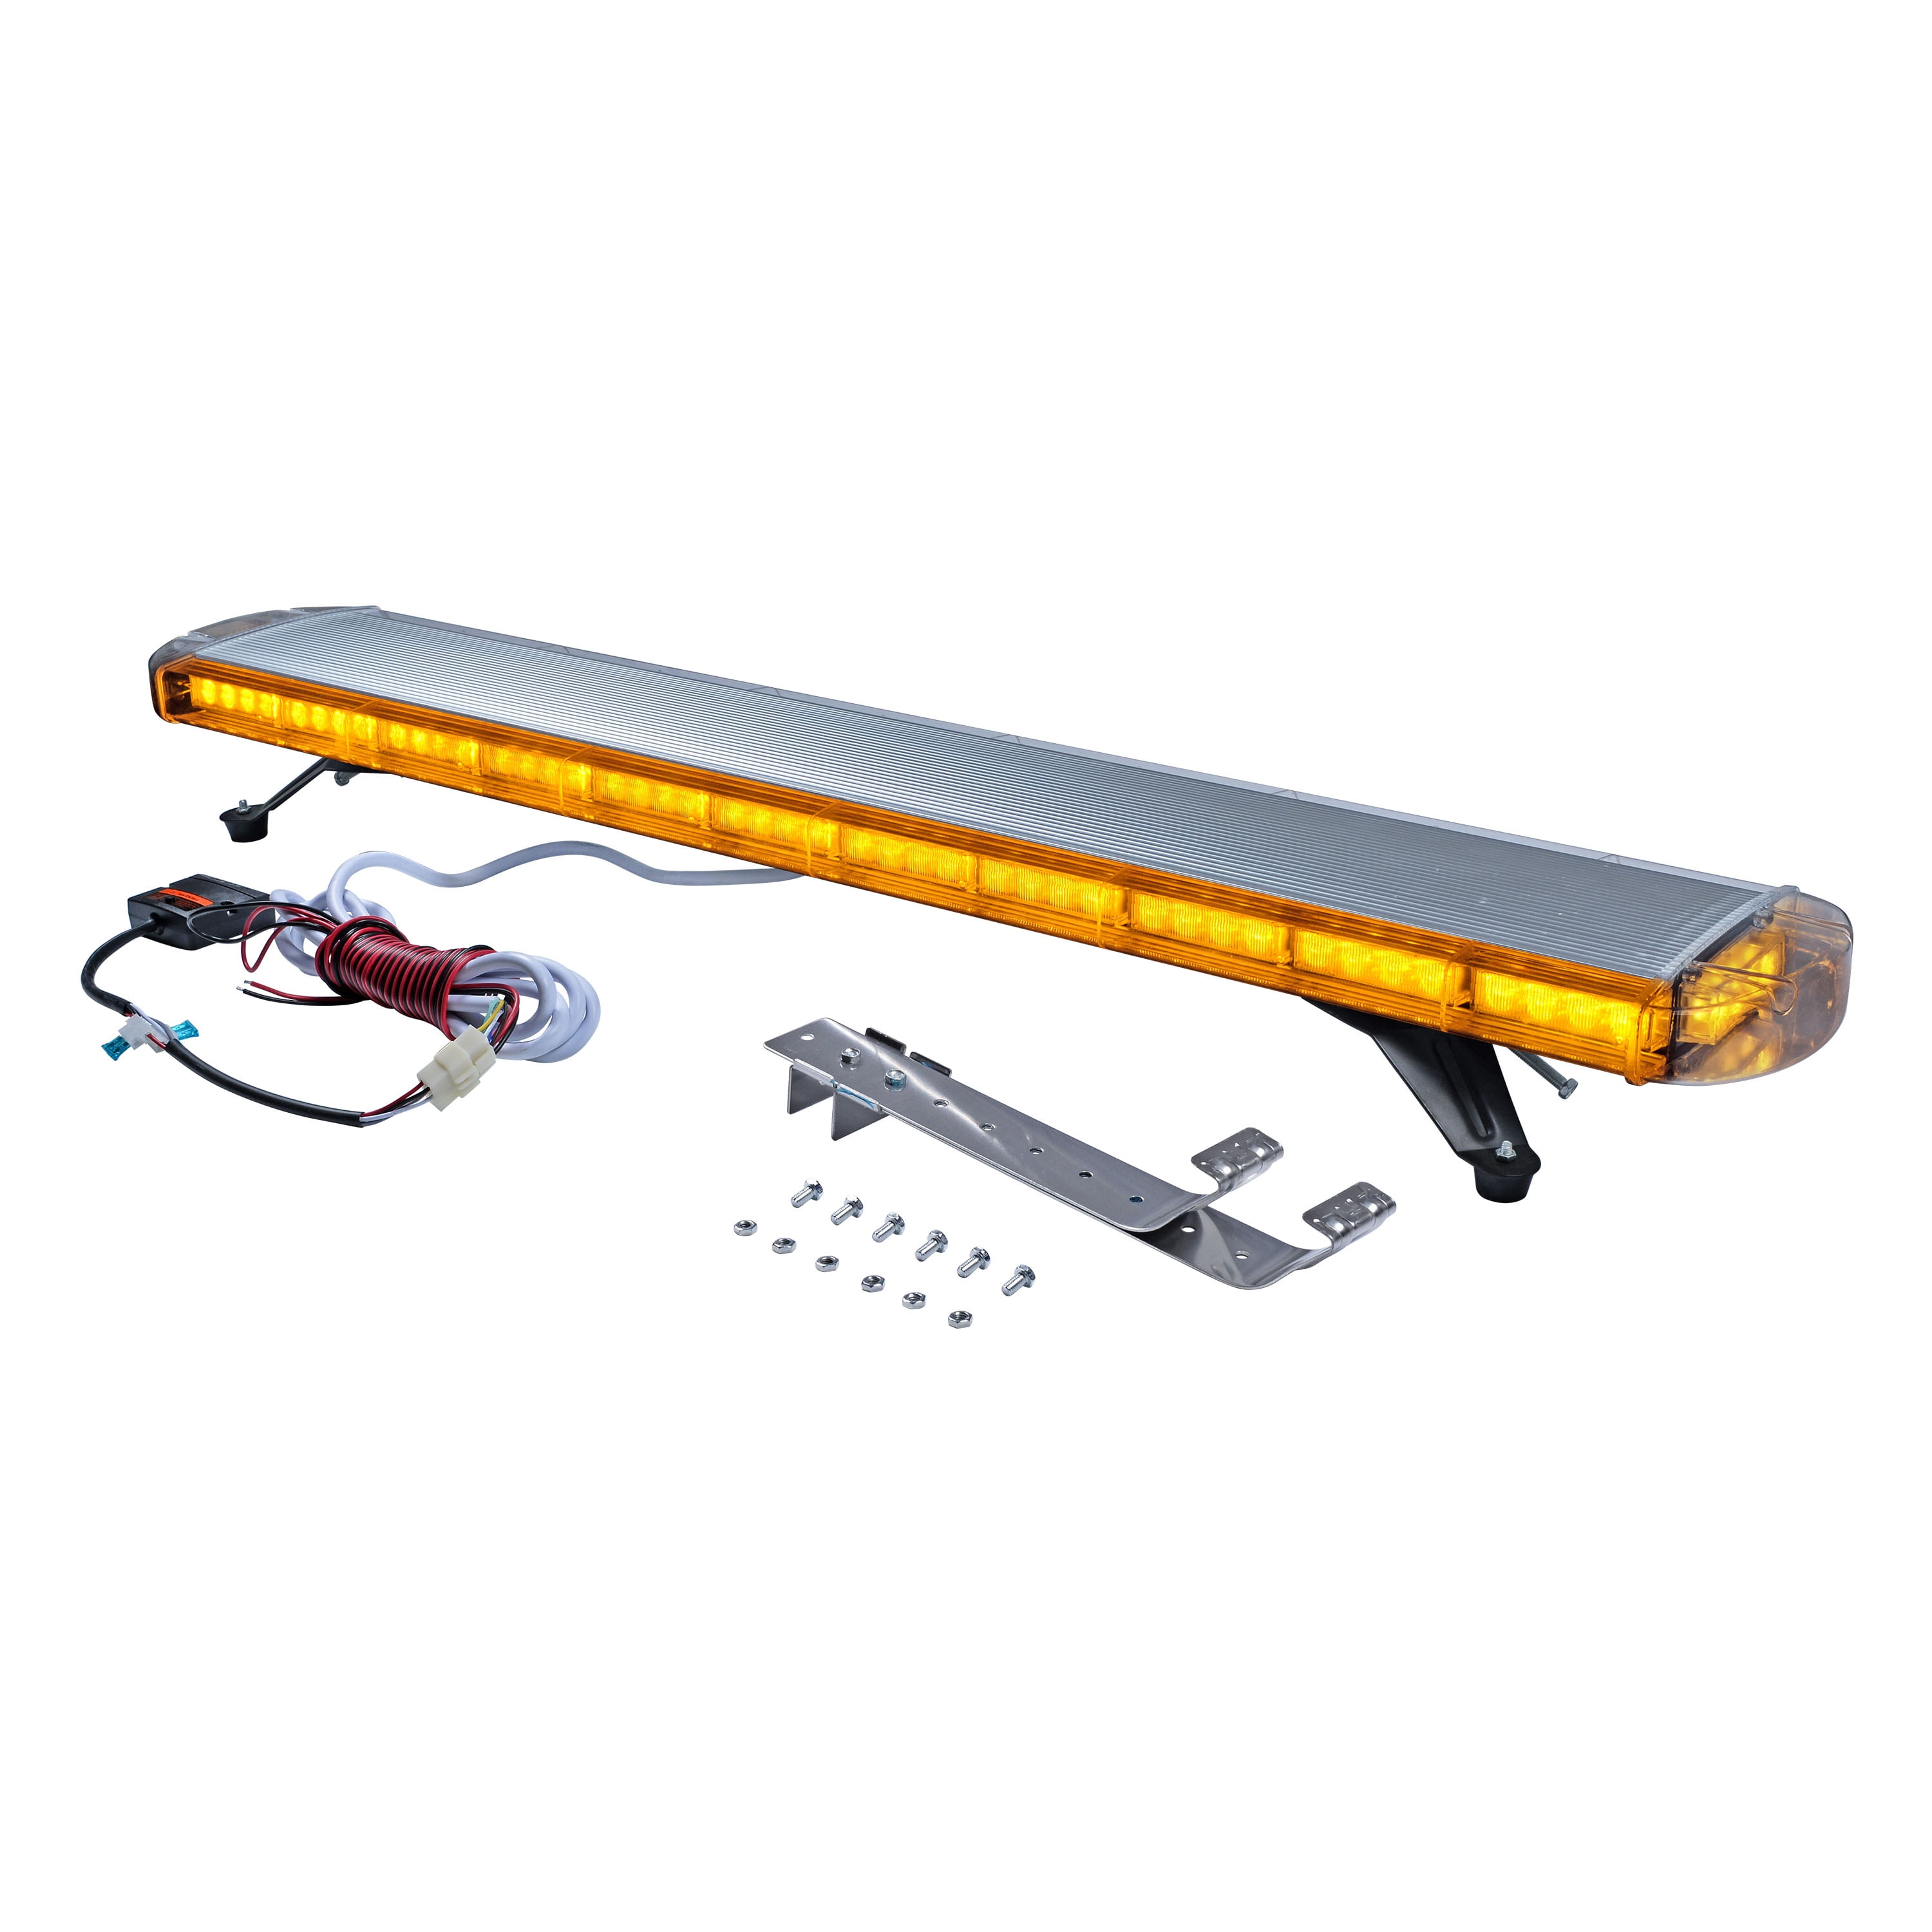 Details about   51" 96 LED Amber White Emergency Strobe Light Bar Beacon Warning Flash Tow Truck 